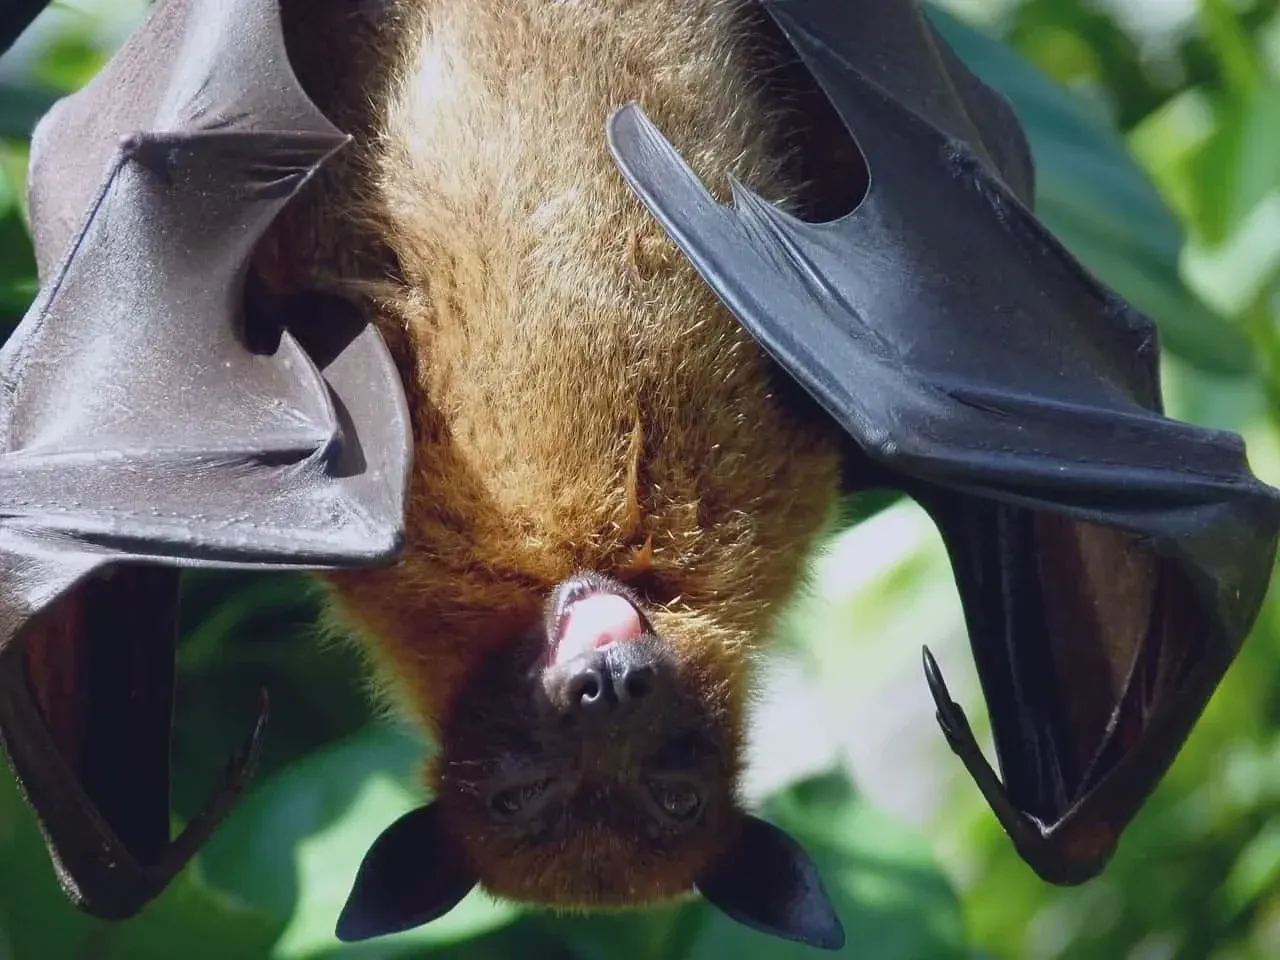 Most species of bats are black or brown.